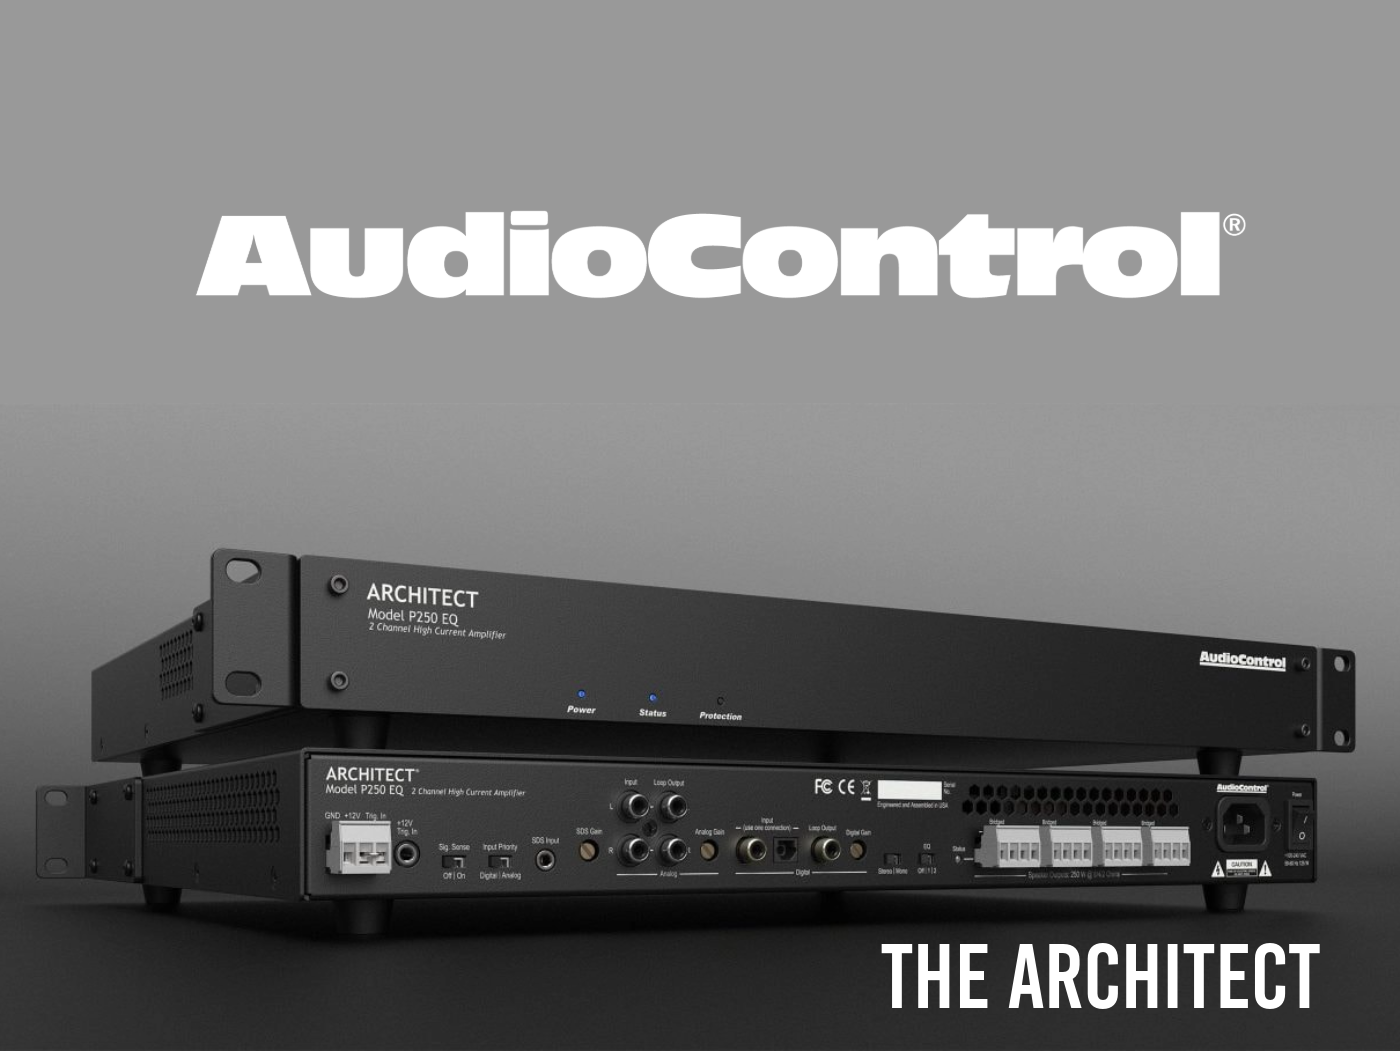 AudioControl Delivers Maximum Power and Performance from a Sleek Form Factor with the Architect Model P250EQ Amplifier